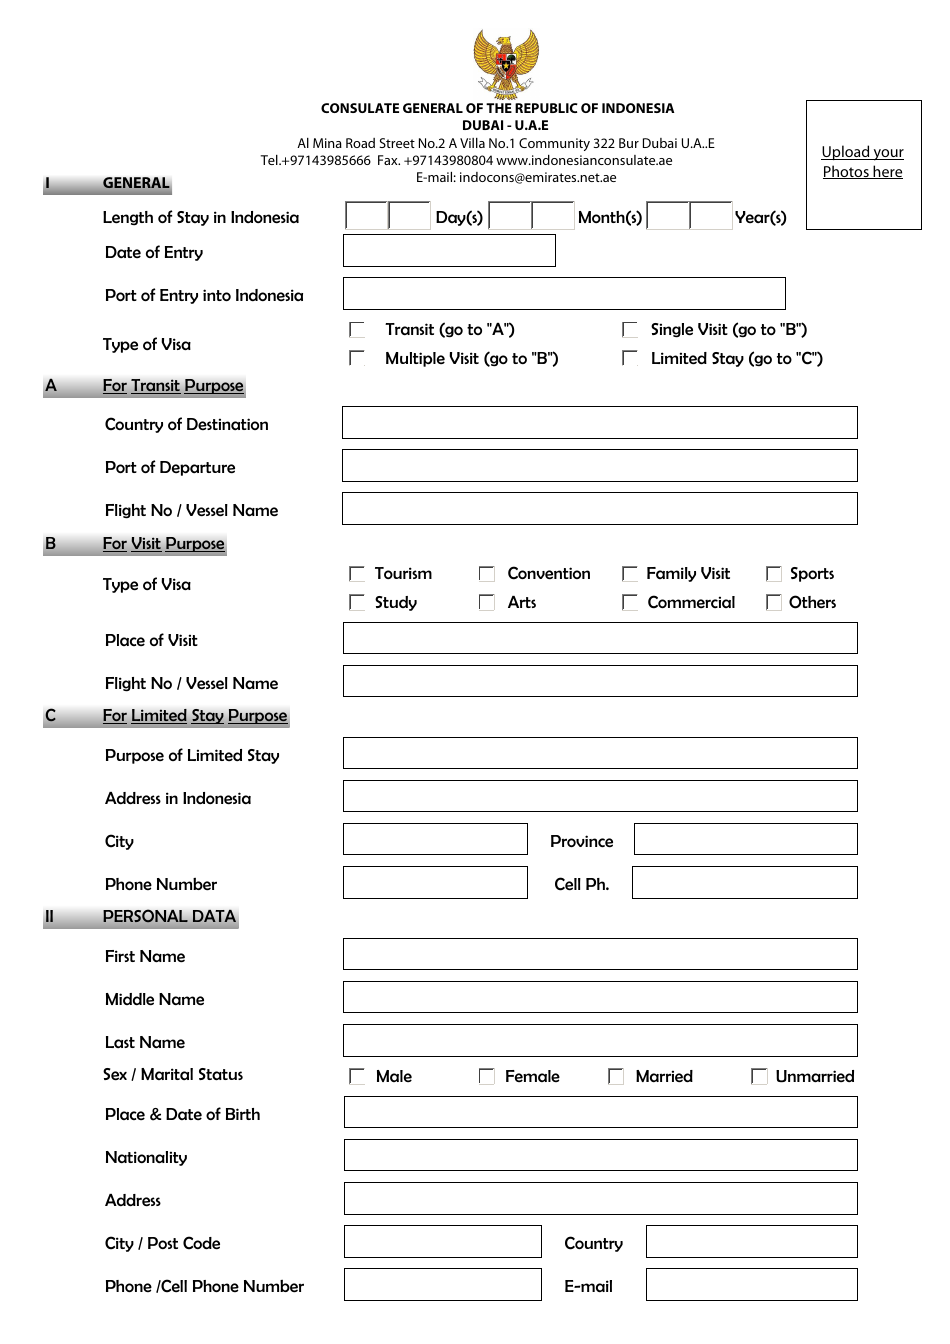 Indonesian Visa Application Form - Consulate General of the Republic of Indonesia - Dubai, United Arab Emirates, Page 1